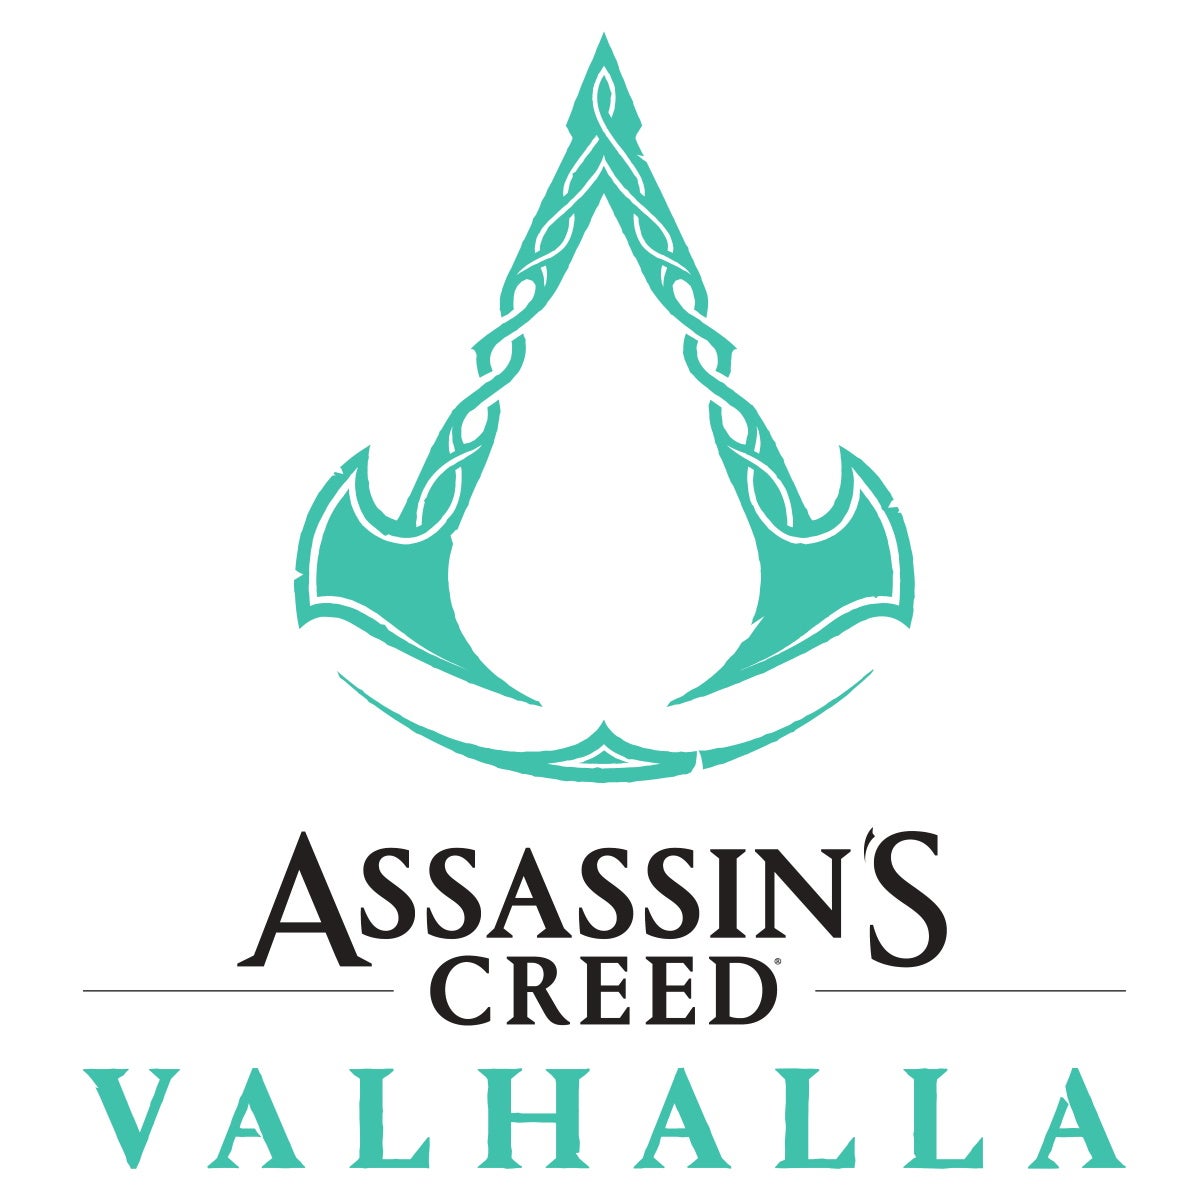 Image for There are 15 studios working on Assassin's Creed Valhalla